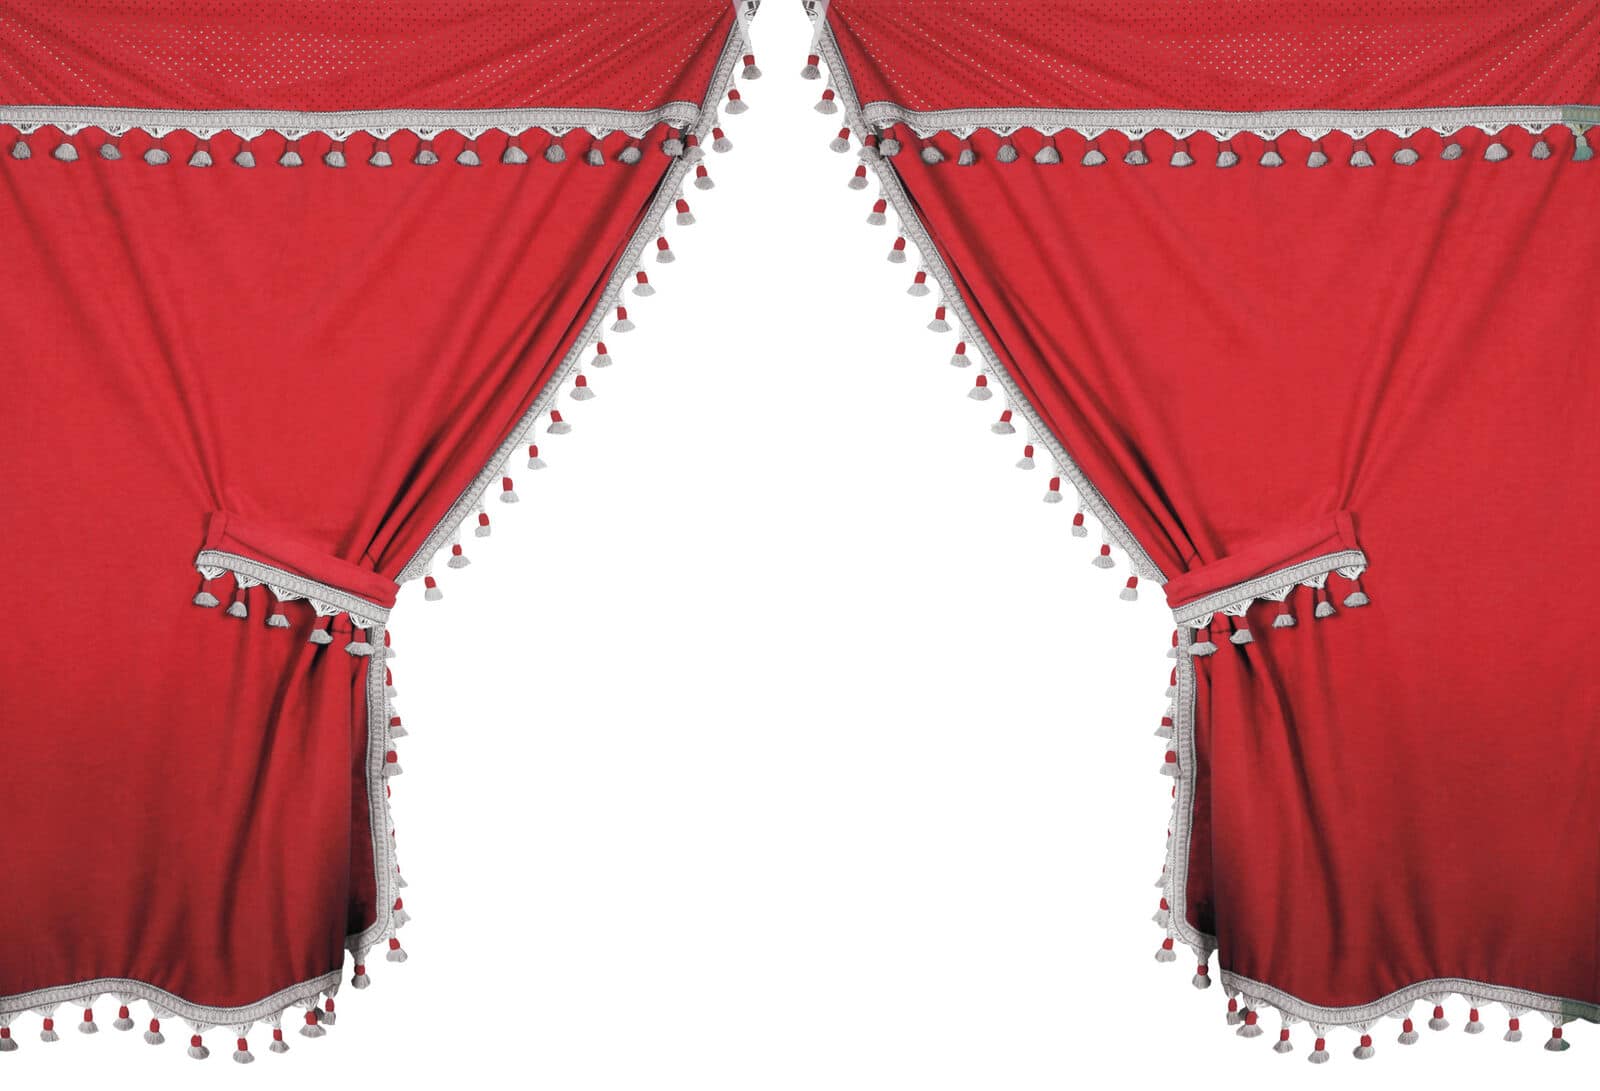 Truck Premier Curtains Lampa 9 Piece Red